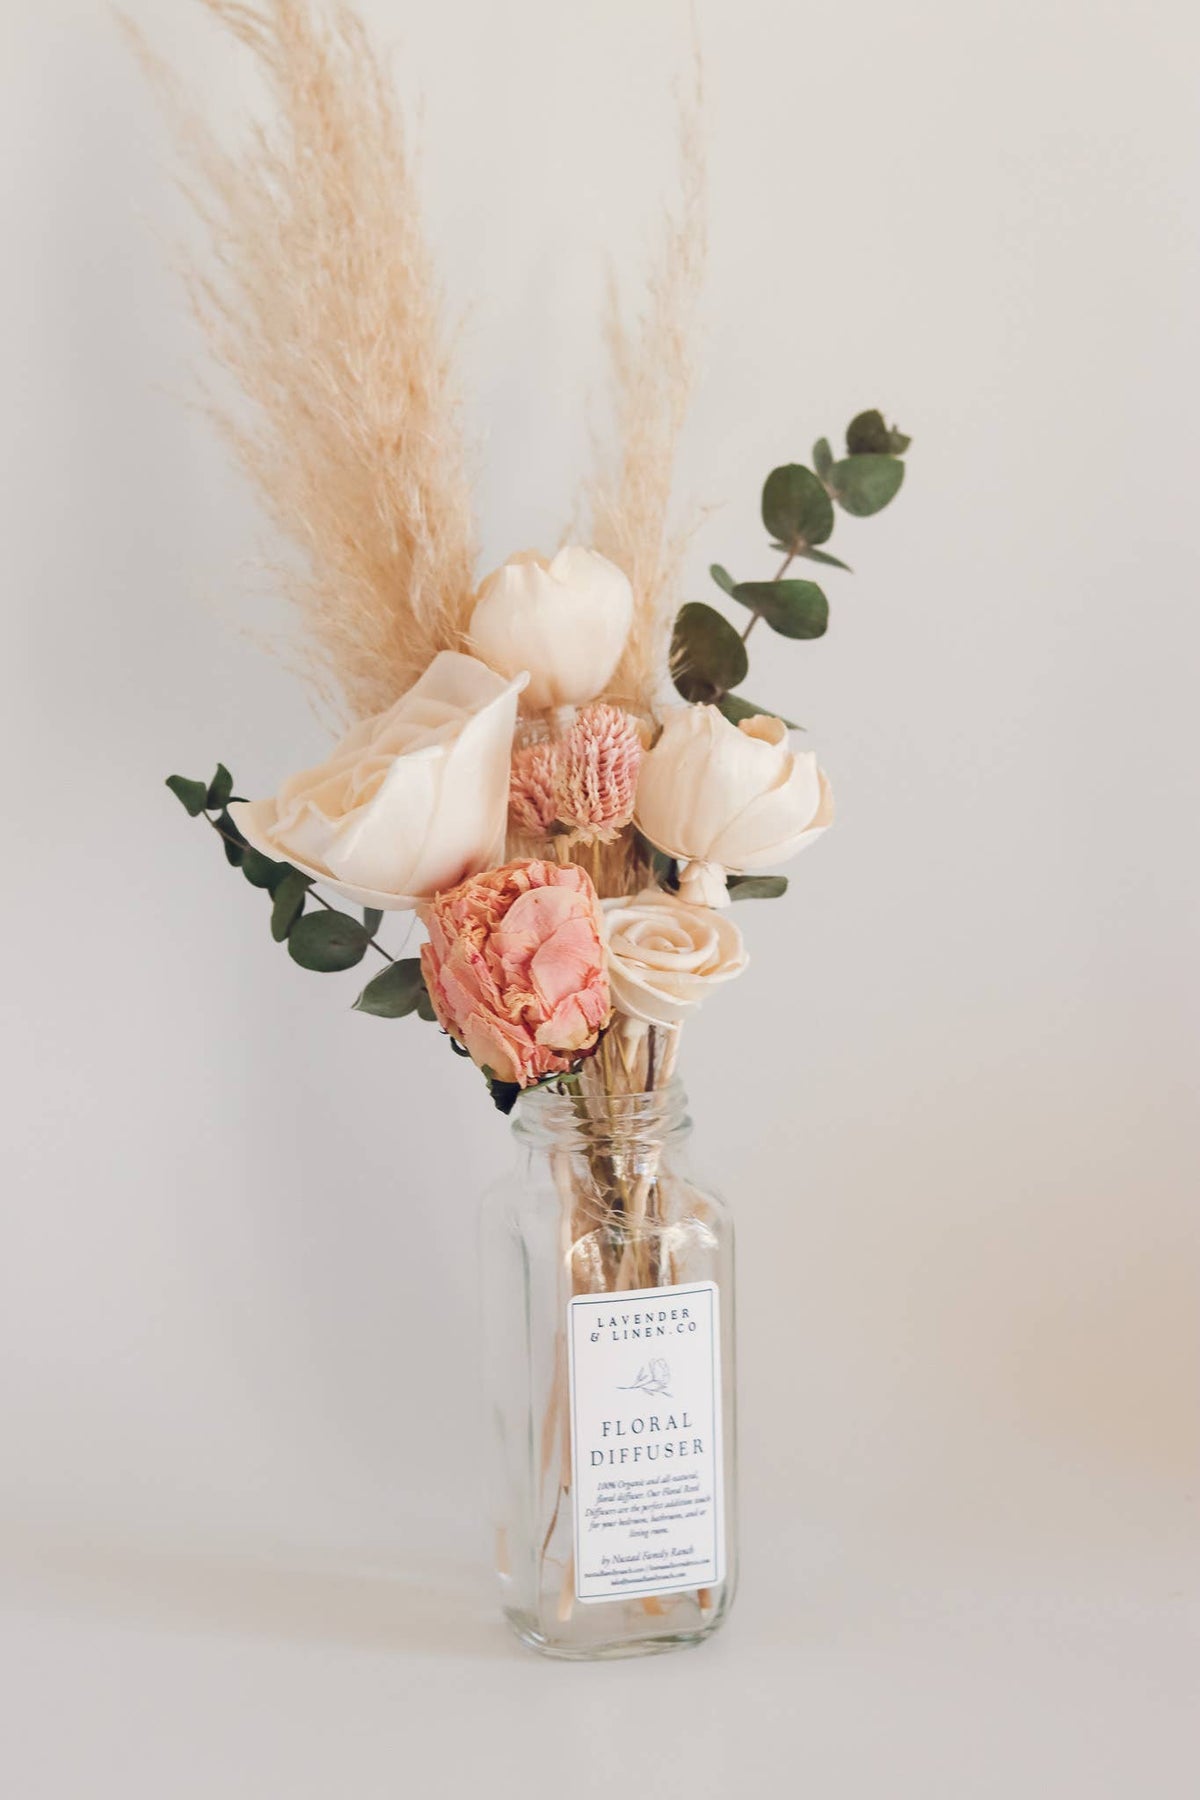 A Nustad Family Ranch Tuberose & Honey reed diffuser in a clear glass bottle with a label, surrounded by dried flowers such as pink peonies and pampas grass against a light beige background.